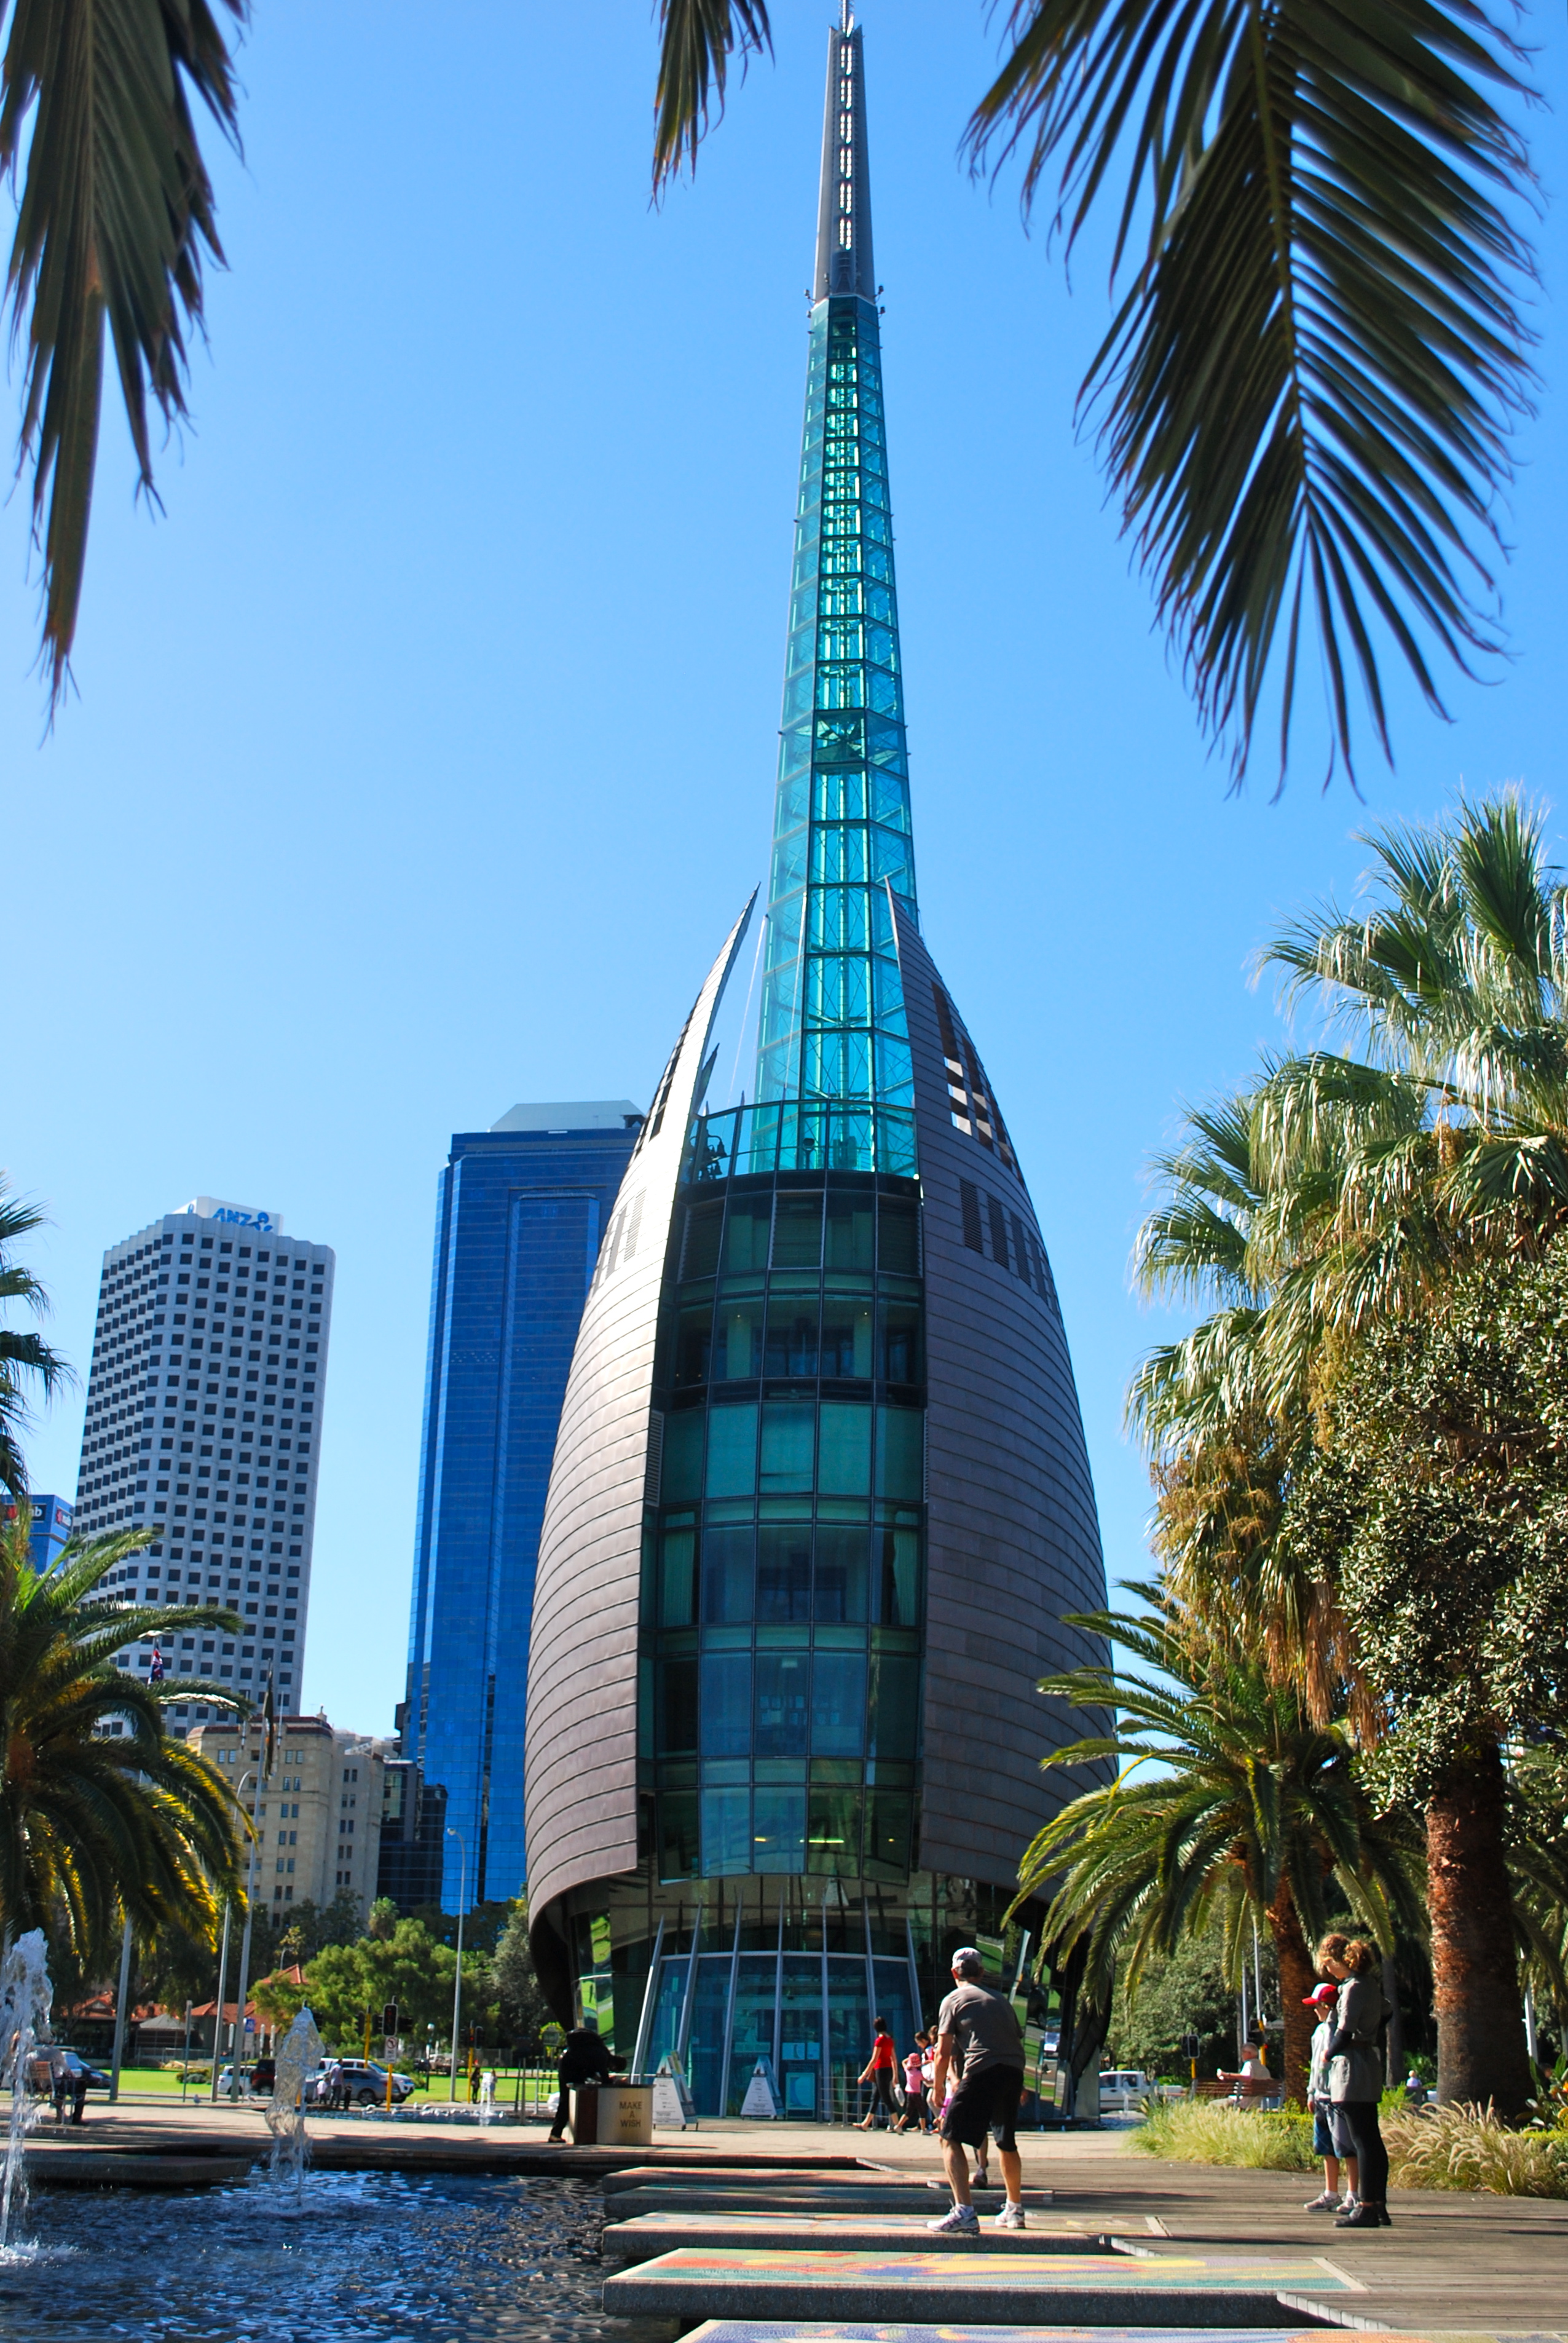 The Swan Bell Tower, Perth Australia